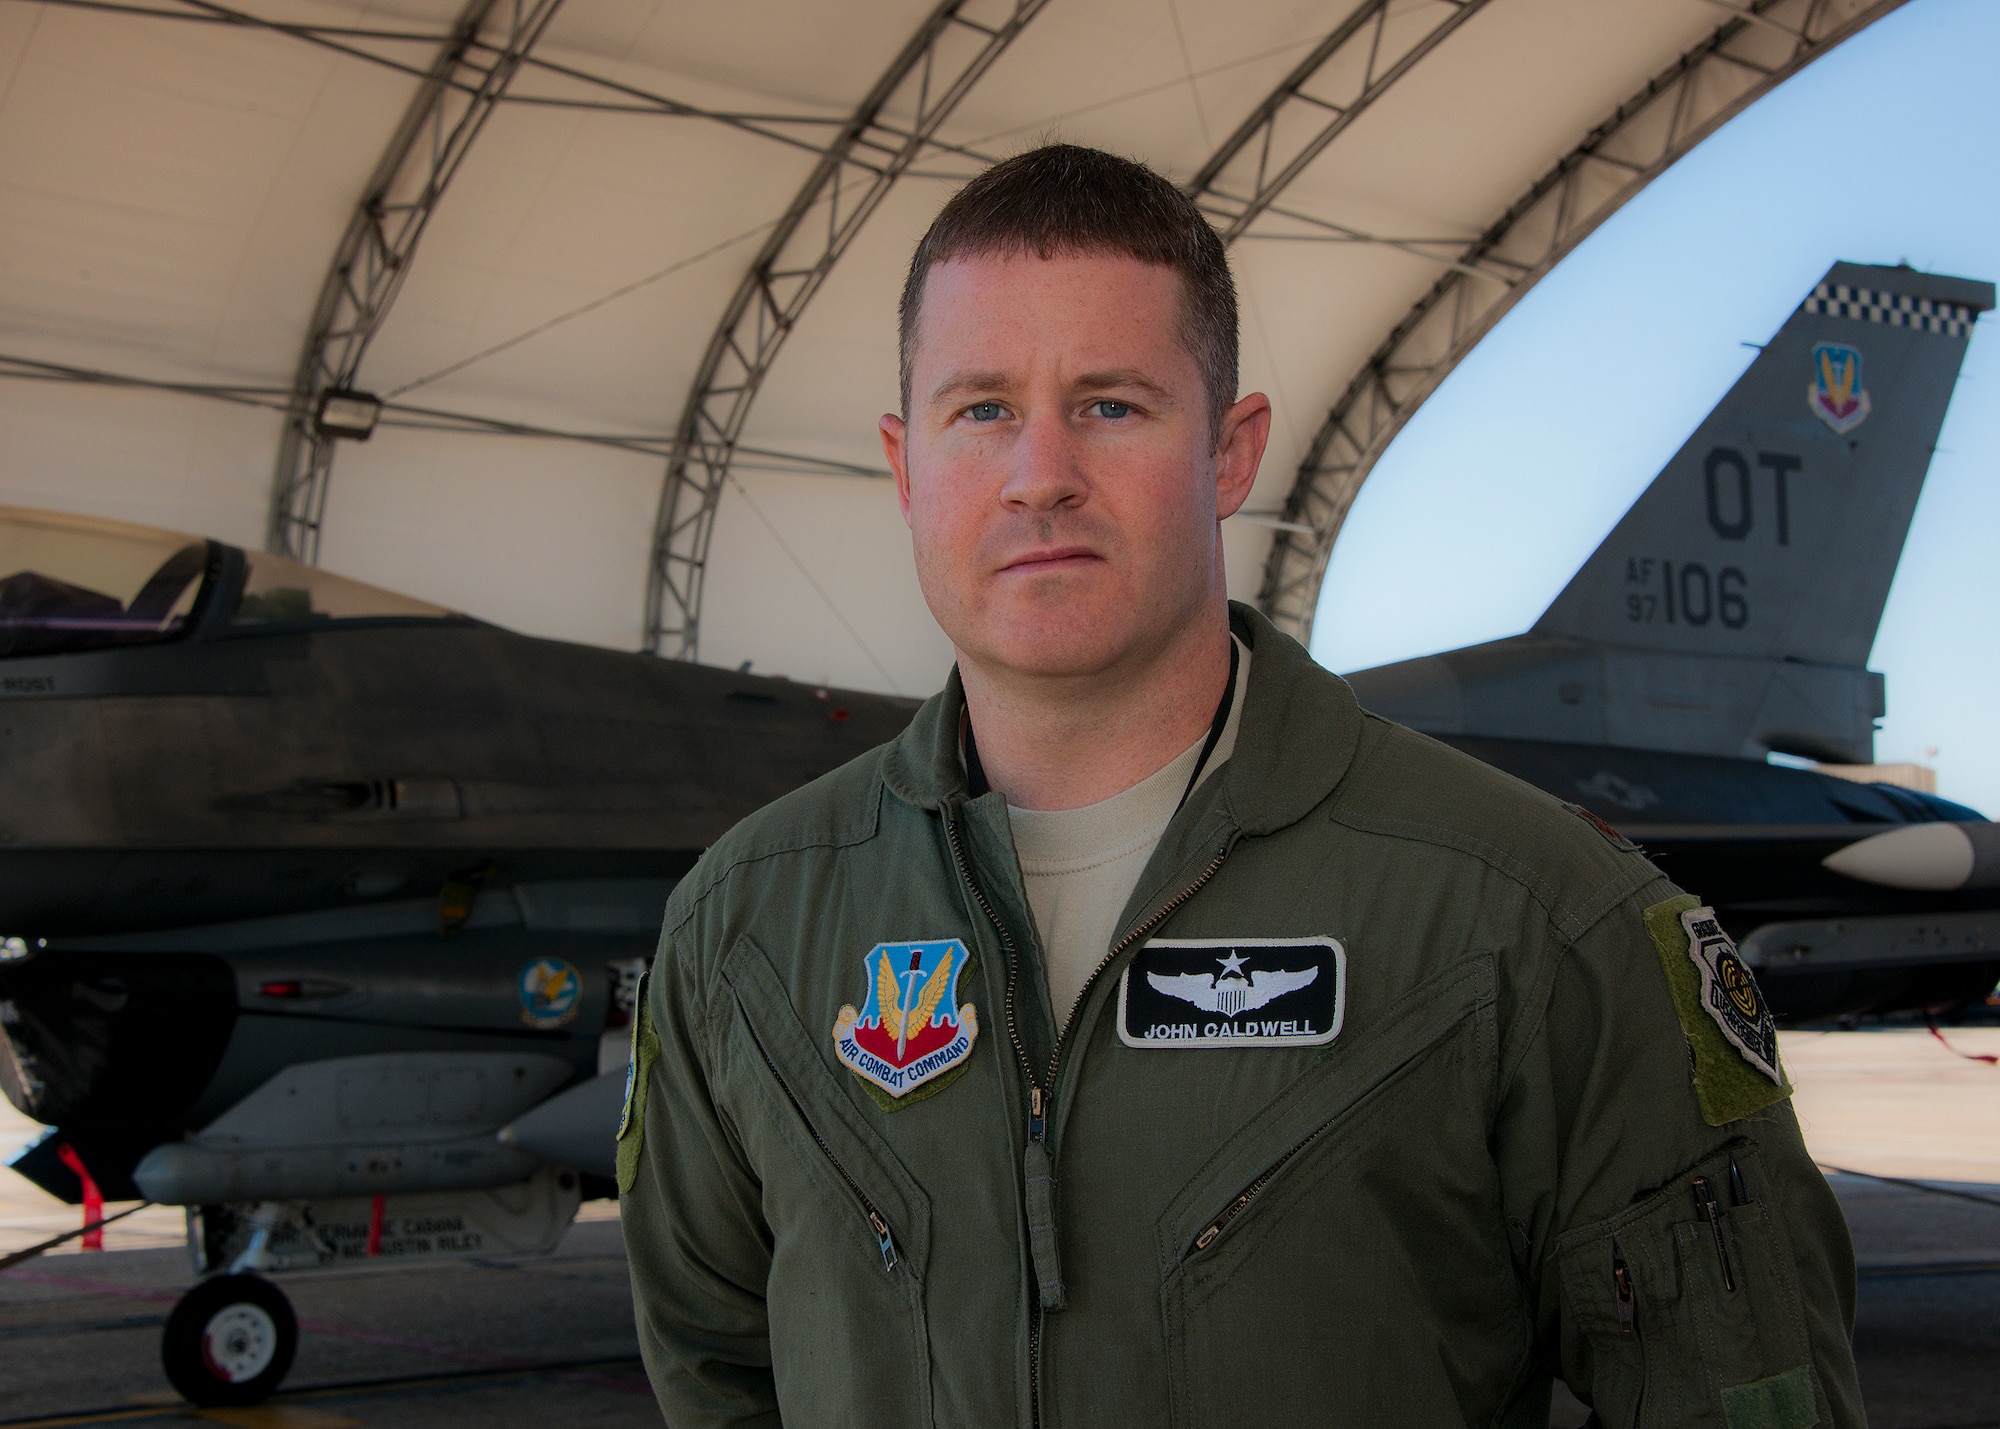 Maj. John Caldwell, of the 85th Test and Evaluation Squadron, was recently awarded the Distinguished Flying Cross for his combat aviation efforts in Afghanistan in 2011. Established by Congress on July 2, 1926, the Distinguished Flying Cross may be awarded to members of any branch of service and to members of the armed forces of friendly nations.  (U.S. Air Force photo/Samuel King Jr.) 